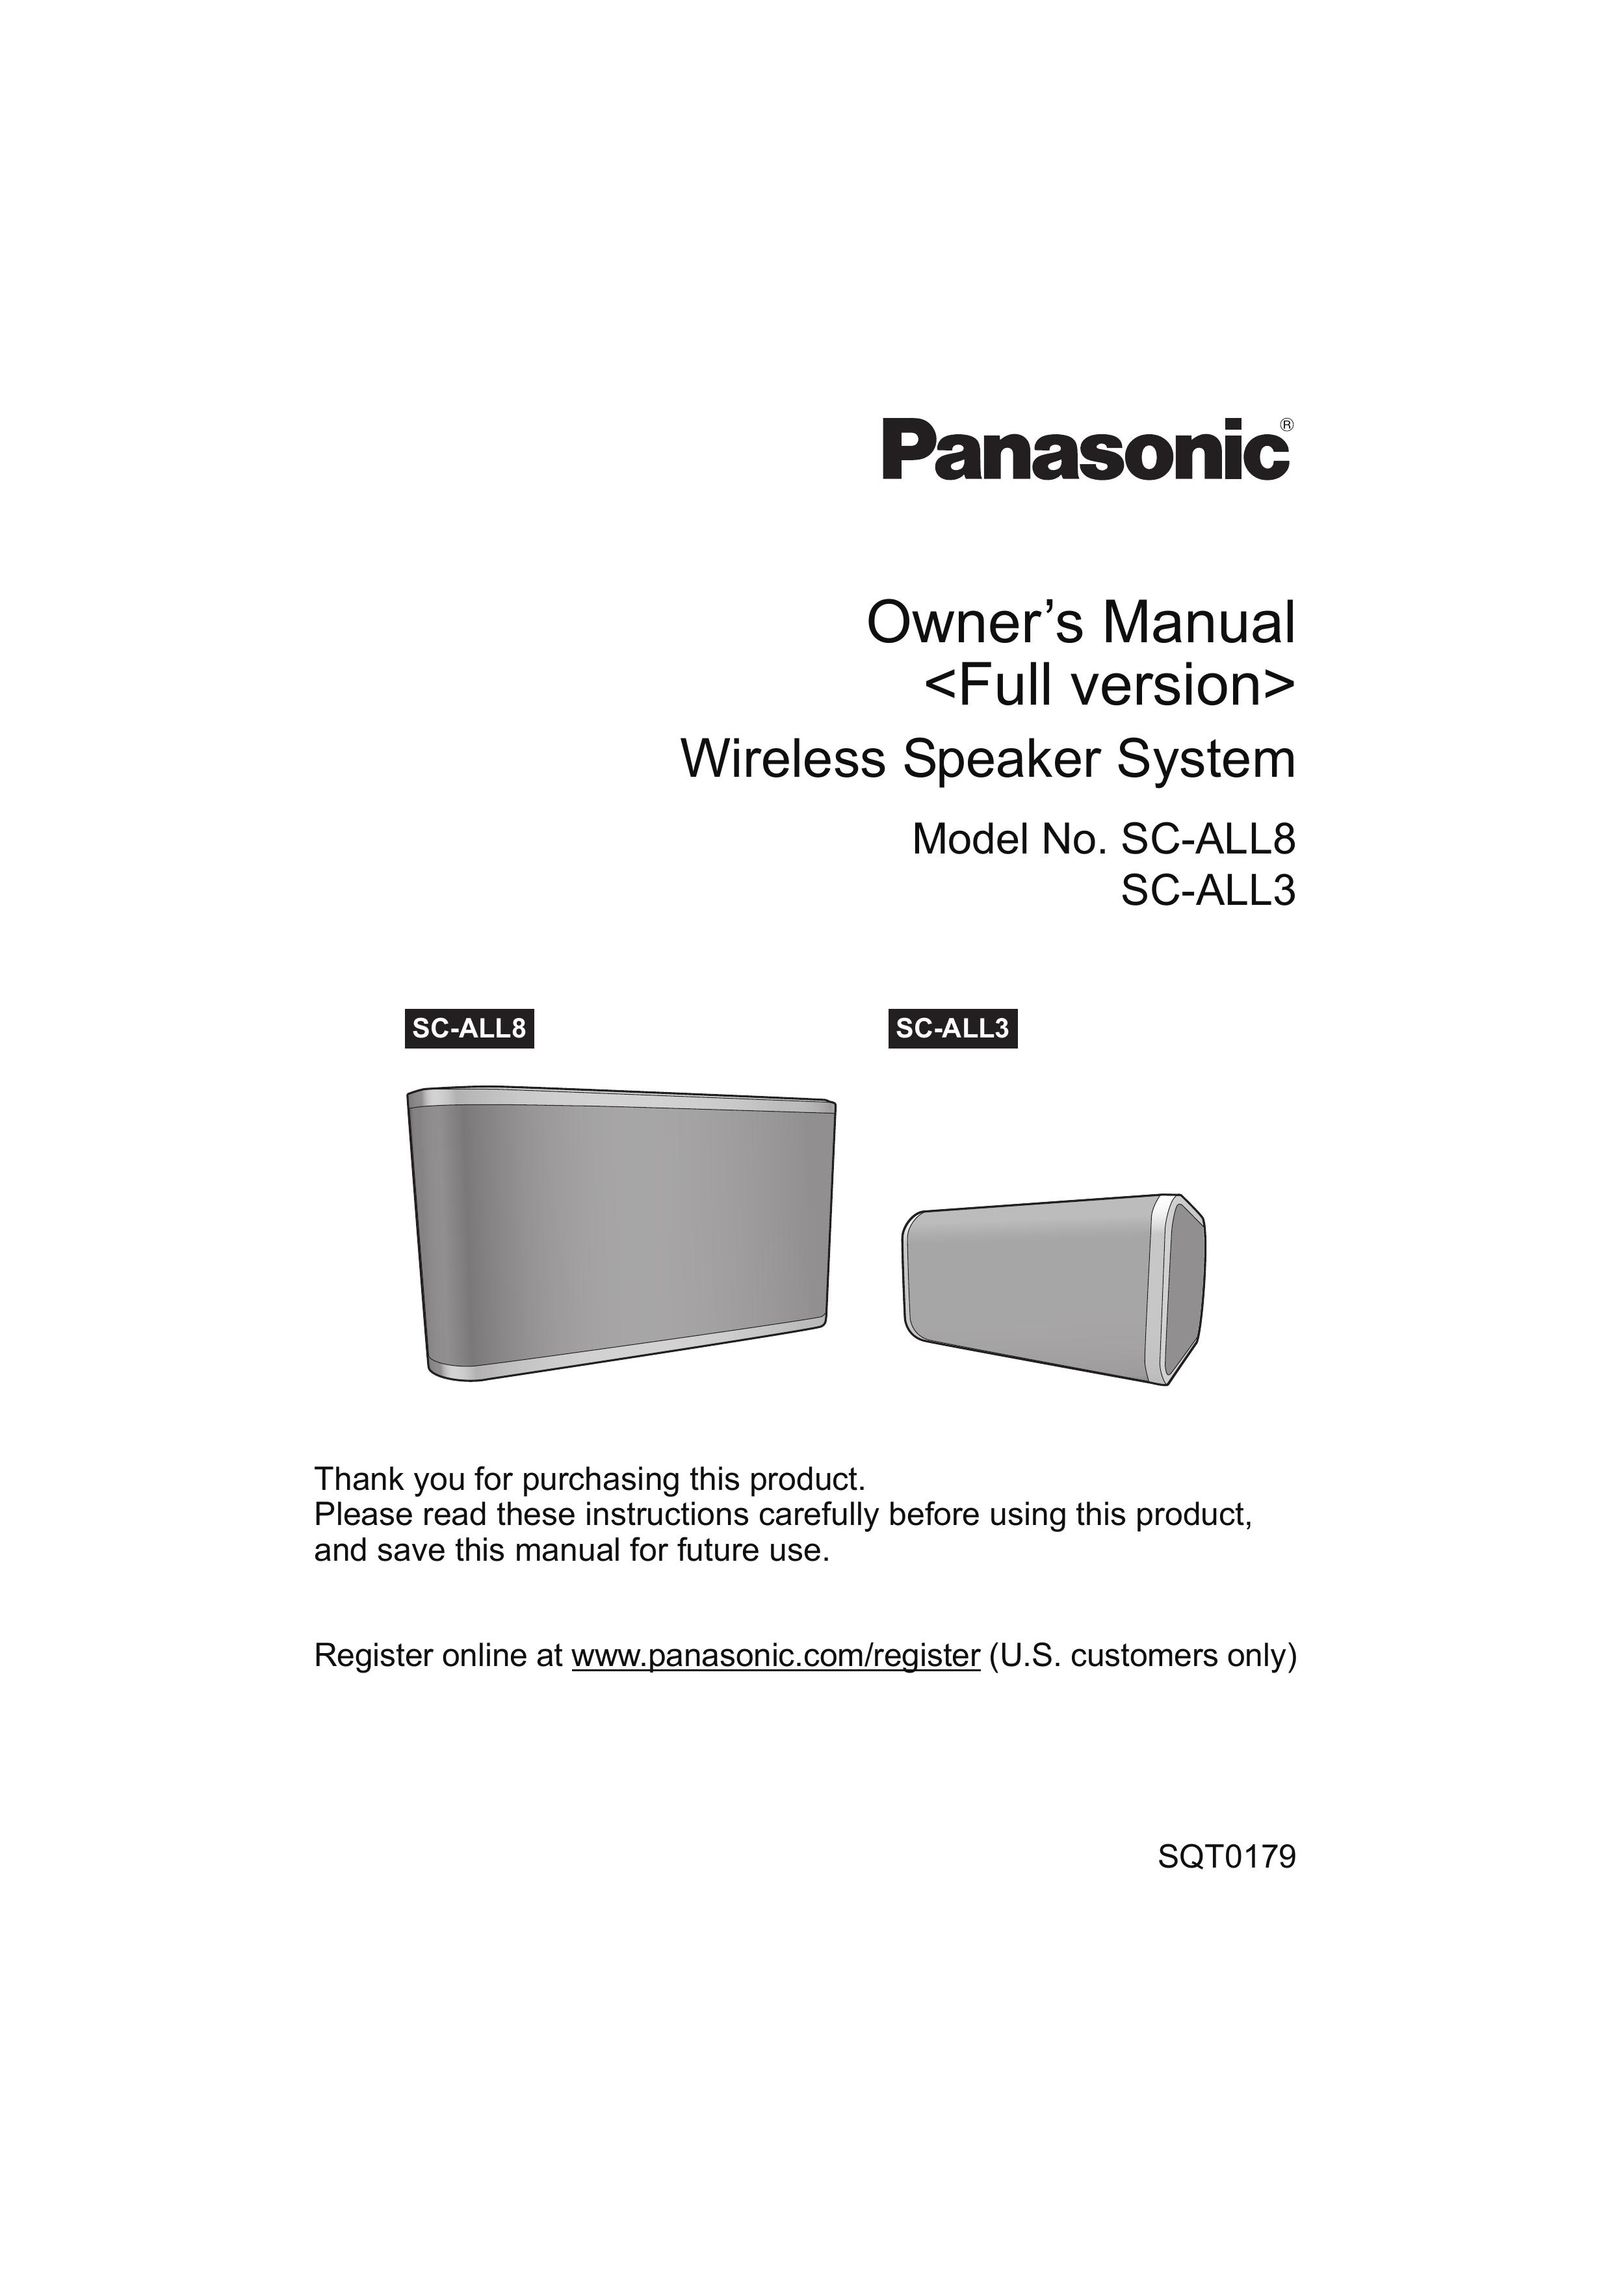 Panasonic SC-ALL3 Home Theater System User Manual